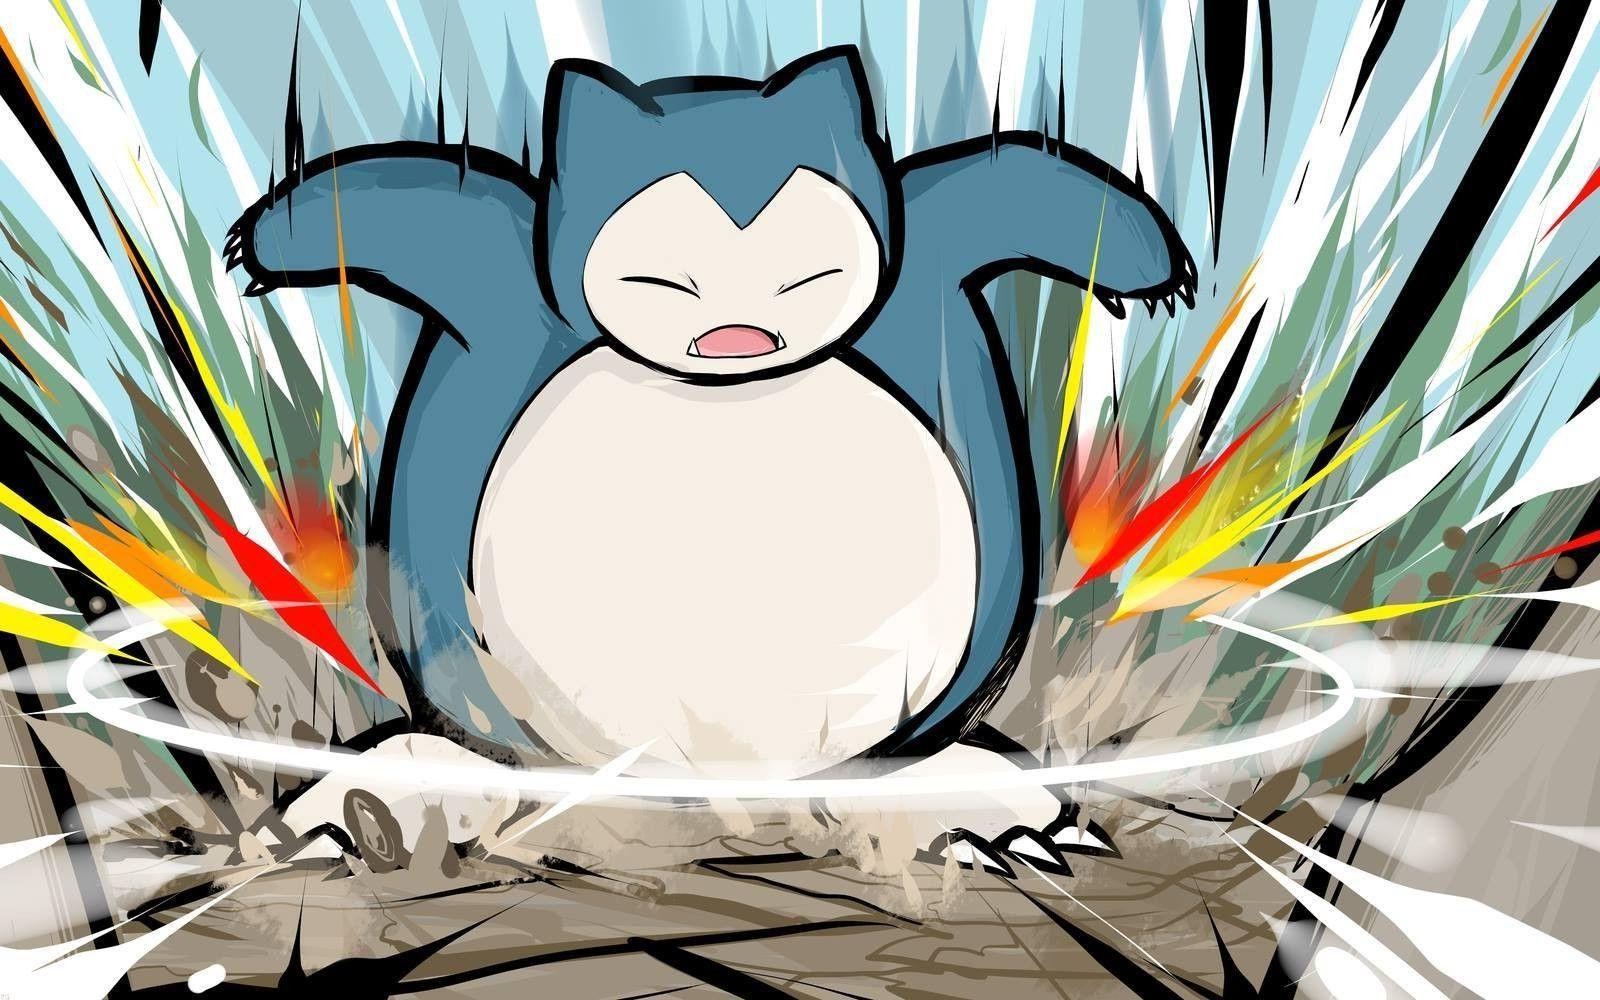 Pokémon, Snorlax Wallpapers HD / Desktop and Mobile Backgrounds.